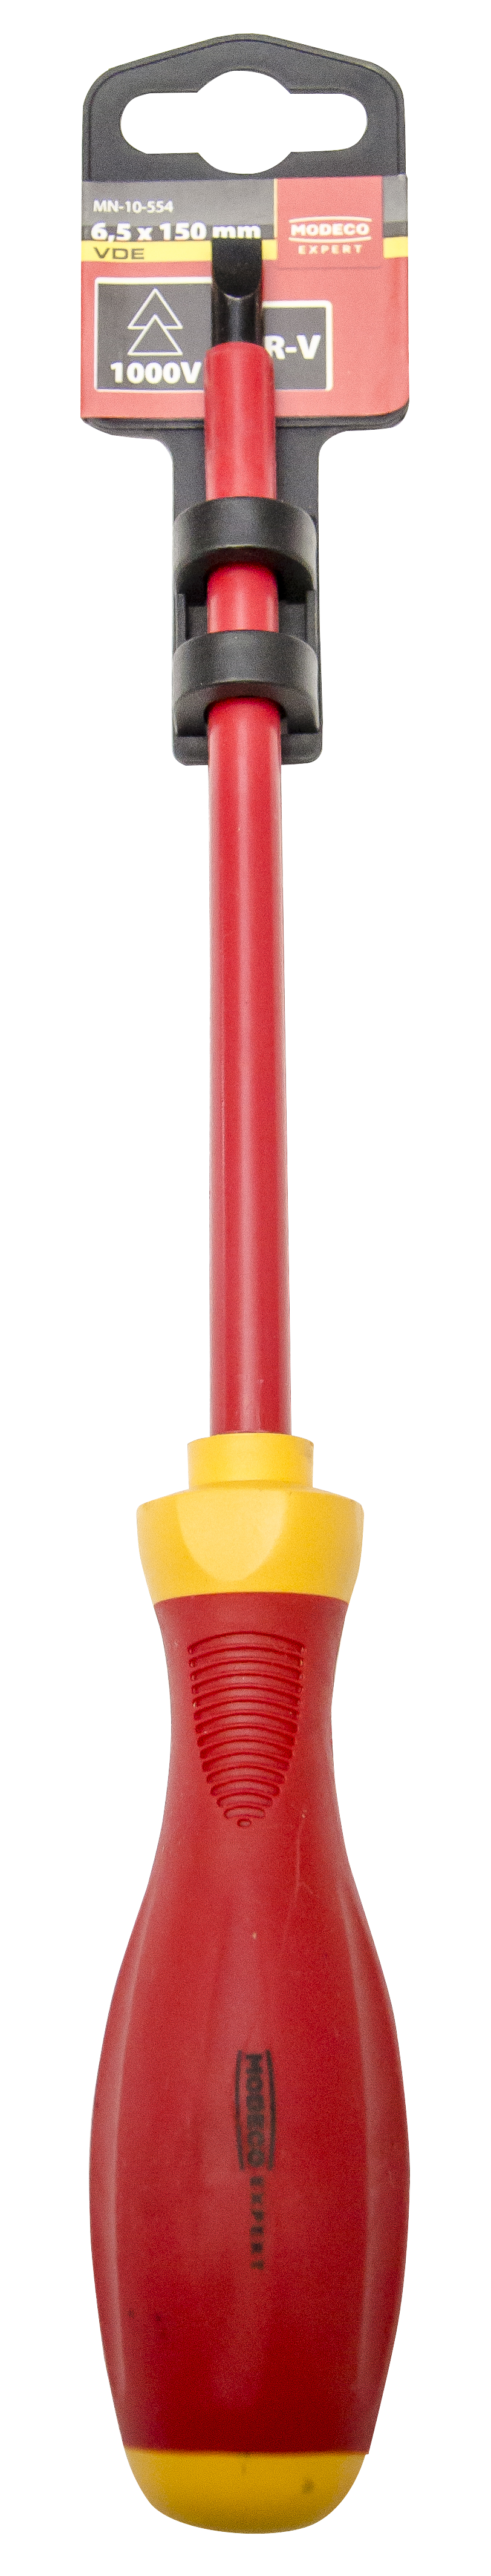 MN-10-55 Slotted insulated screwdrivers